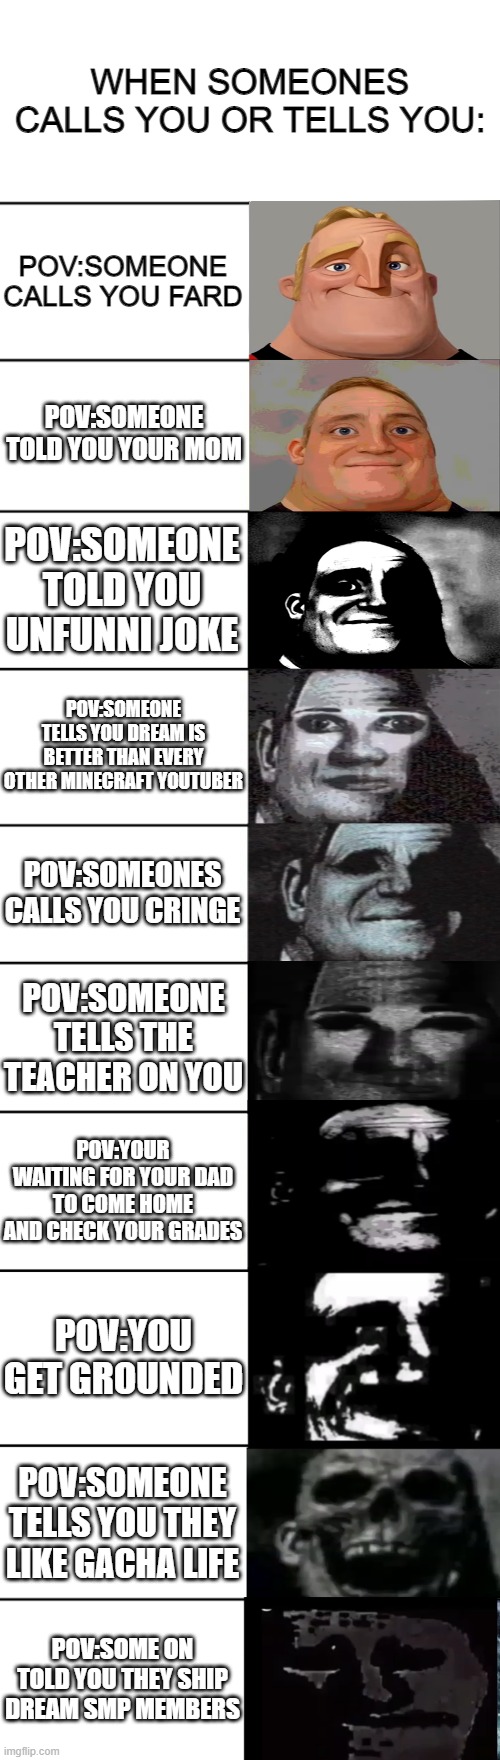 someone tells you are called you: | WHEN SOMEONES CALLS YOU OR TELLS YOU:; POV:SOMEONE CALLS YOU FARD; POV:SOMEONE TOLD YOU YOUR MOM; POV:SOMEONE TOLD YOU UNFUNNI JOKE; POV:SOMEONE TELLS YOU DREAM IS BETTER THAN EVERY OTHER MINECRAFT YOUTUBER; POV:SOMEONES CALLS YOU CRINGE; POV:SOMEONE TELLS THE TEACHER ON YOU; POV:YOUR WAITING FOR YOUR DAD TO COME HOME AND CHECK YOUR GRADES; POV:YOU GET GROUNDED; POV:SOMEONE TELLS YOU THEY LIKE GACHA LIFE; POV:SOME ON TOLD YOU THEY SHIP DREAM SMP MEMBERS | image tagged in mr incredible becoming uncanny,traumatized mr incredible | made w/ Imgflip meme maker